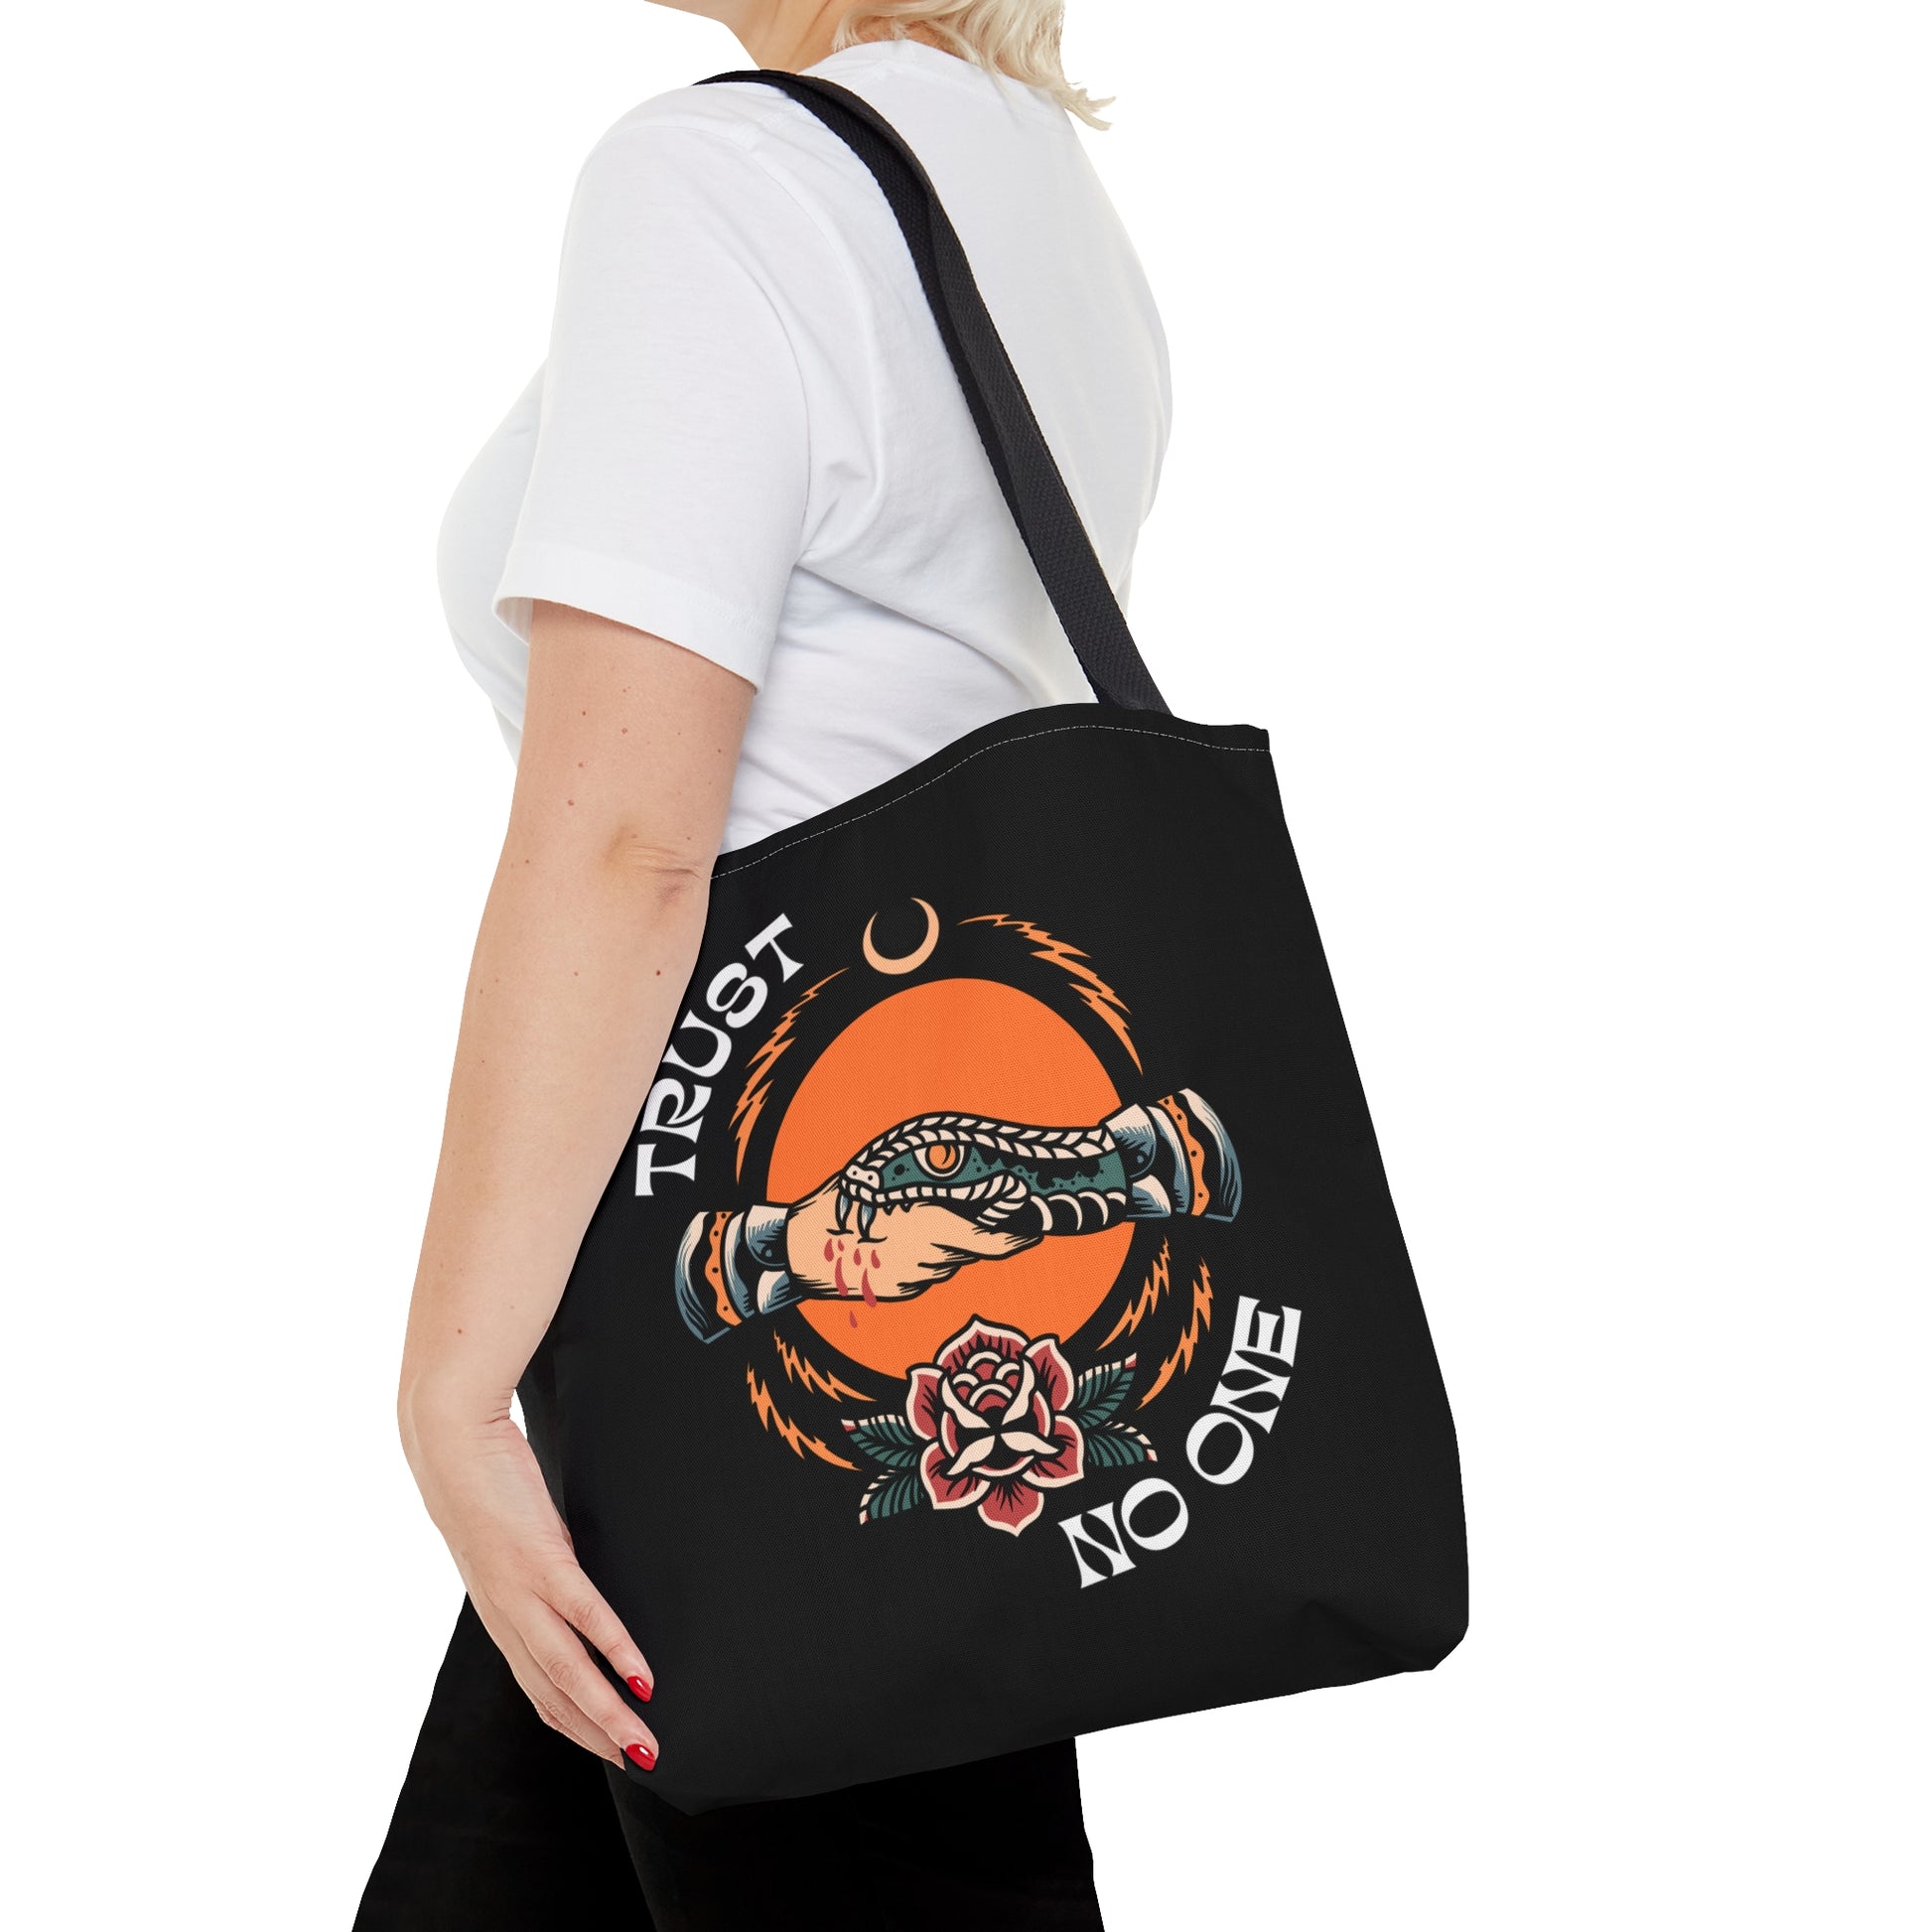 Trust No One Snake Bite Tattoo Tote Bag in Black / Vintage American Old School Traditional Tattoo Flash / Punk Rock Beach Shopping - Foxlark Crystal Jewelry